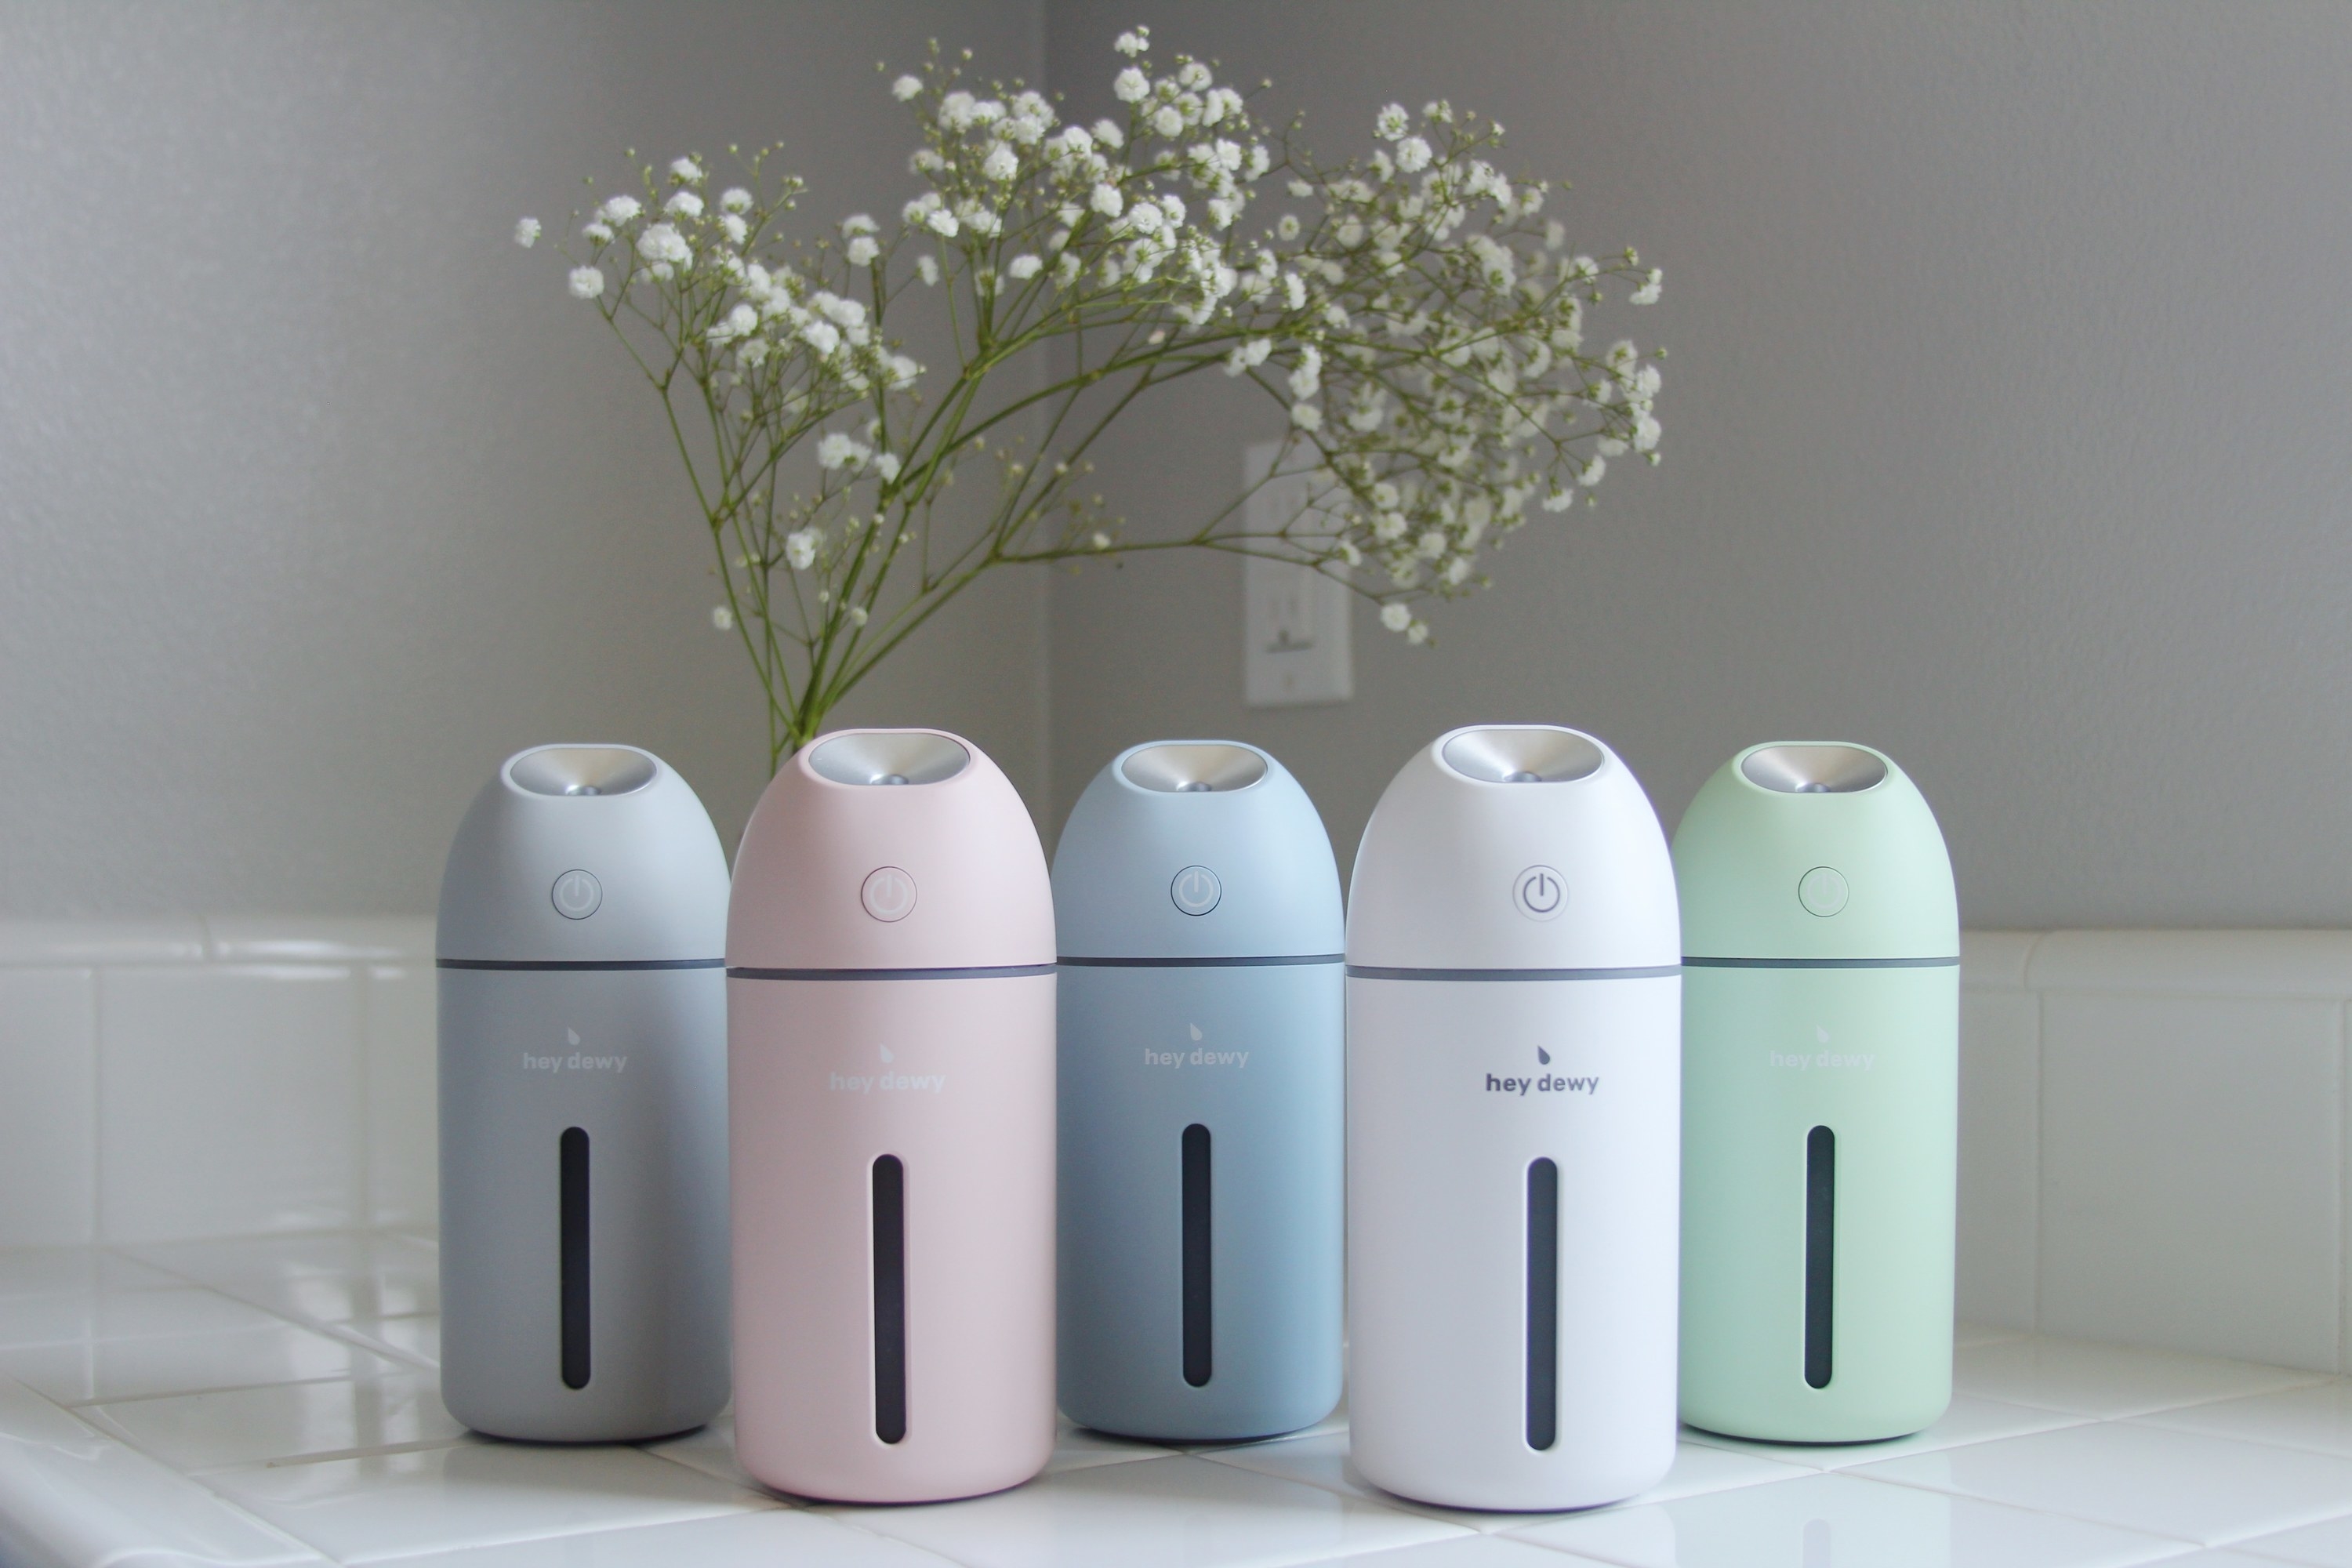 Hey Dewy humidifiers in different colors on white counter.